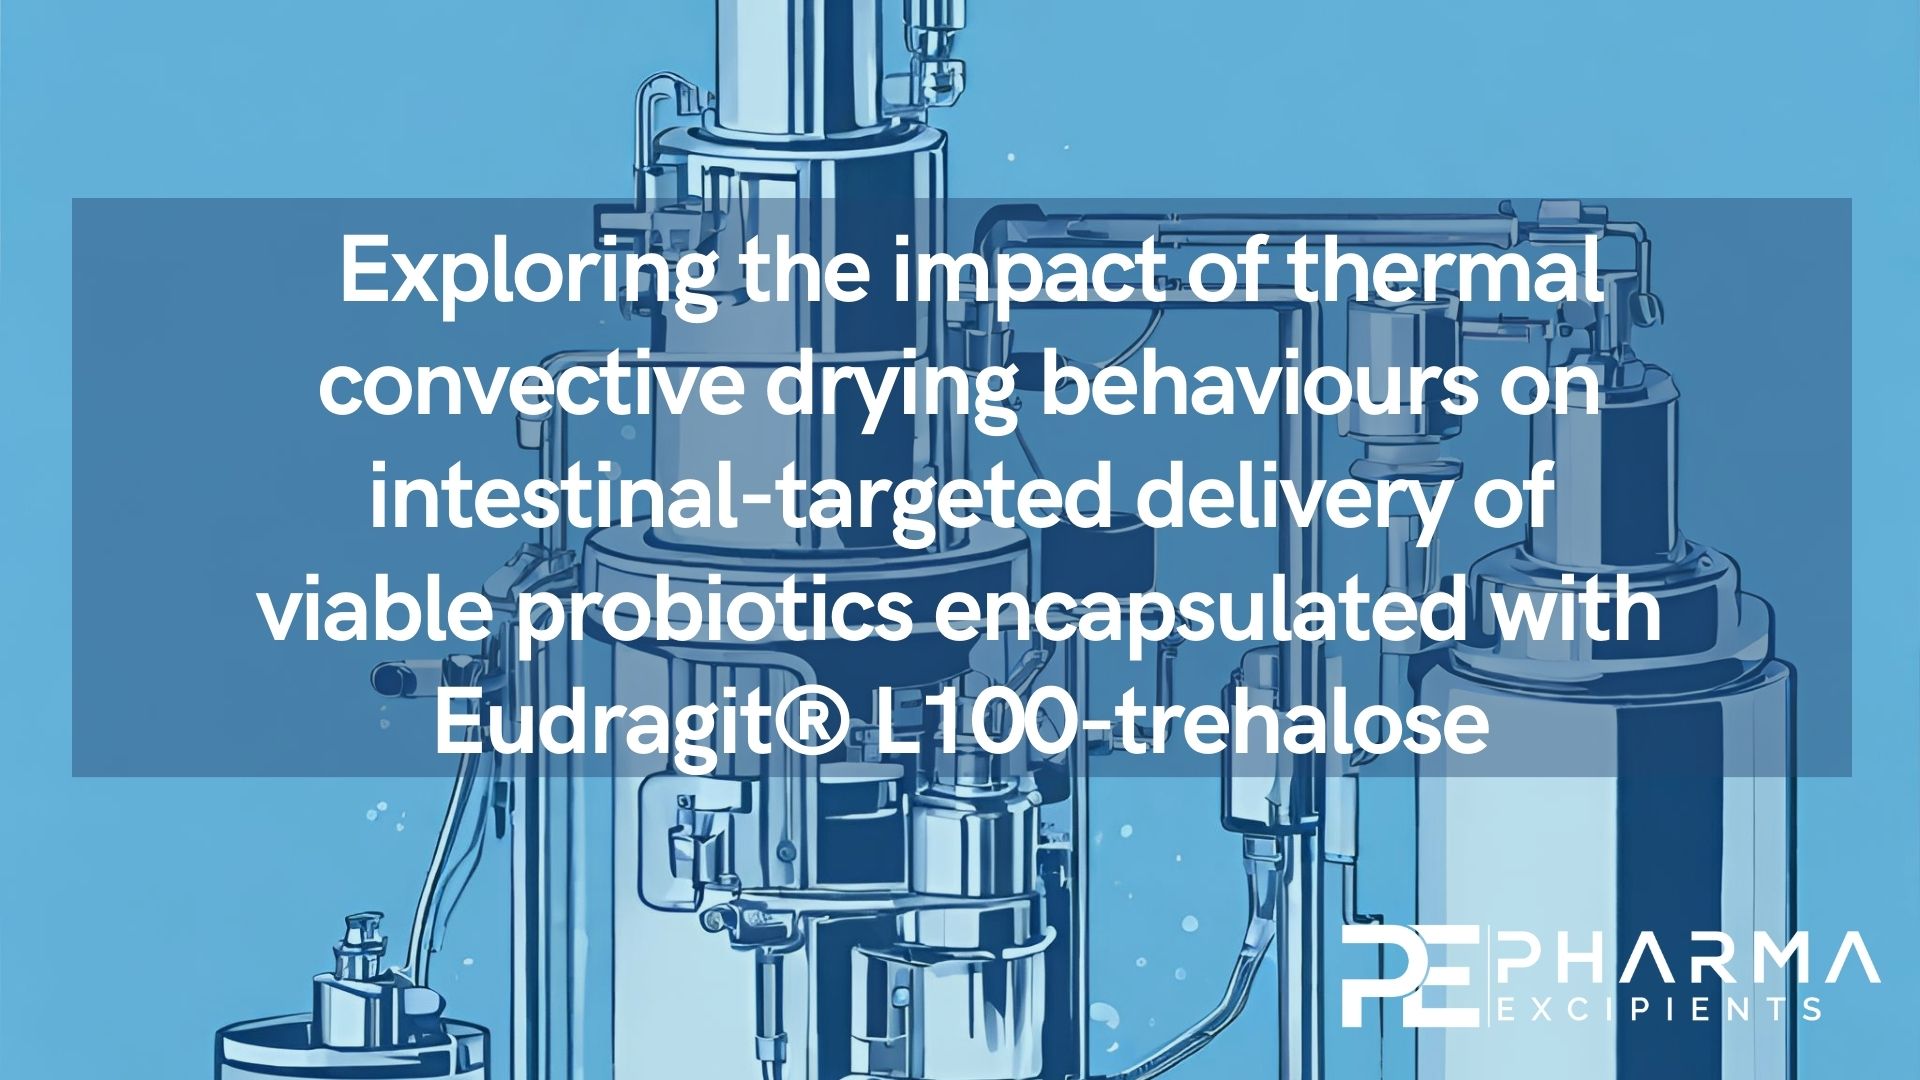 Exploring the impact of thermal convective drying behaviours on intestinal-targeted delivery of viable probiotics encapsulated with Eudragit® L100-trehalose